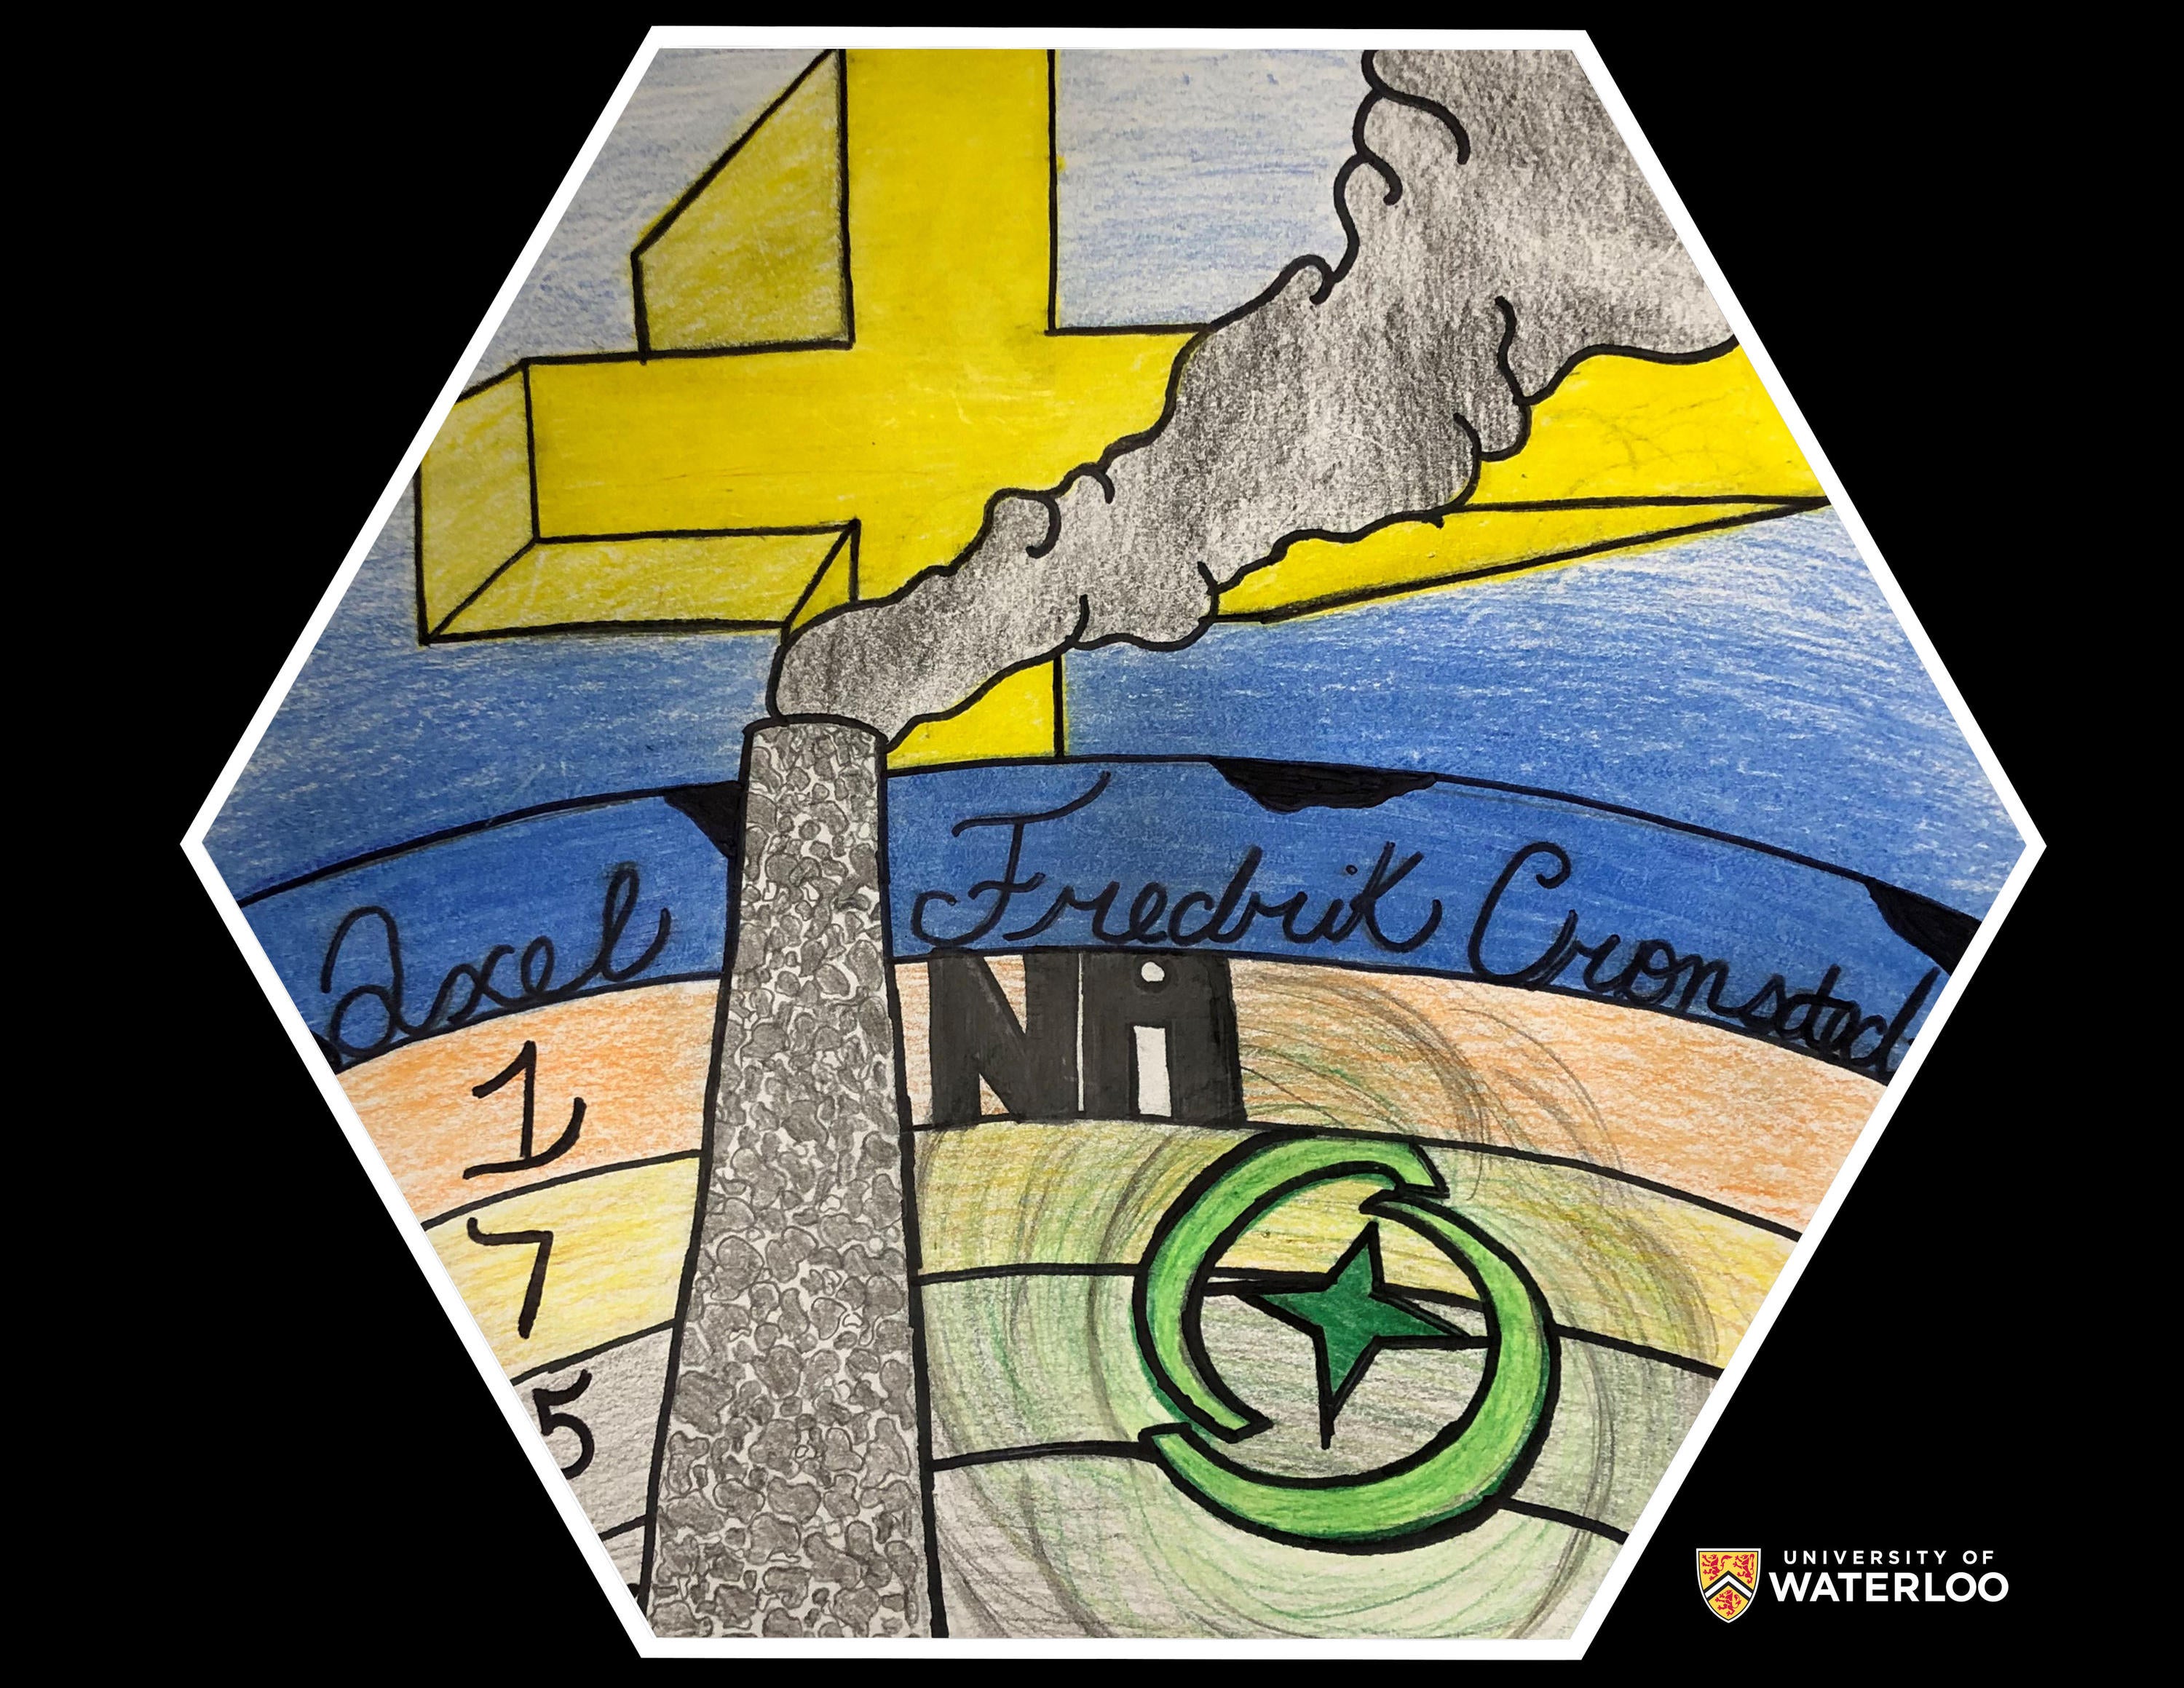 Colored pencil on paper. Large yellow Swedish cross stands on top of layers of the Earth’s crust. “Frederik Cronstedt”, chemical symbol “Ni”, and “1751” appear in the crust’s layers. A large smokestack billowing smoke appears left. The symbol of Sudbury, a green star within two semi-circles, appears right.